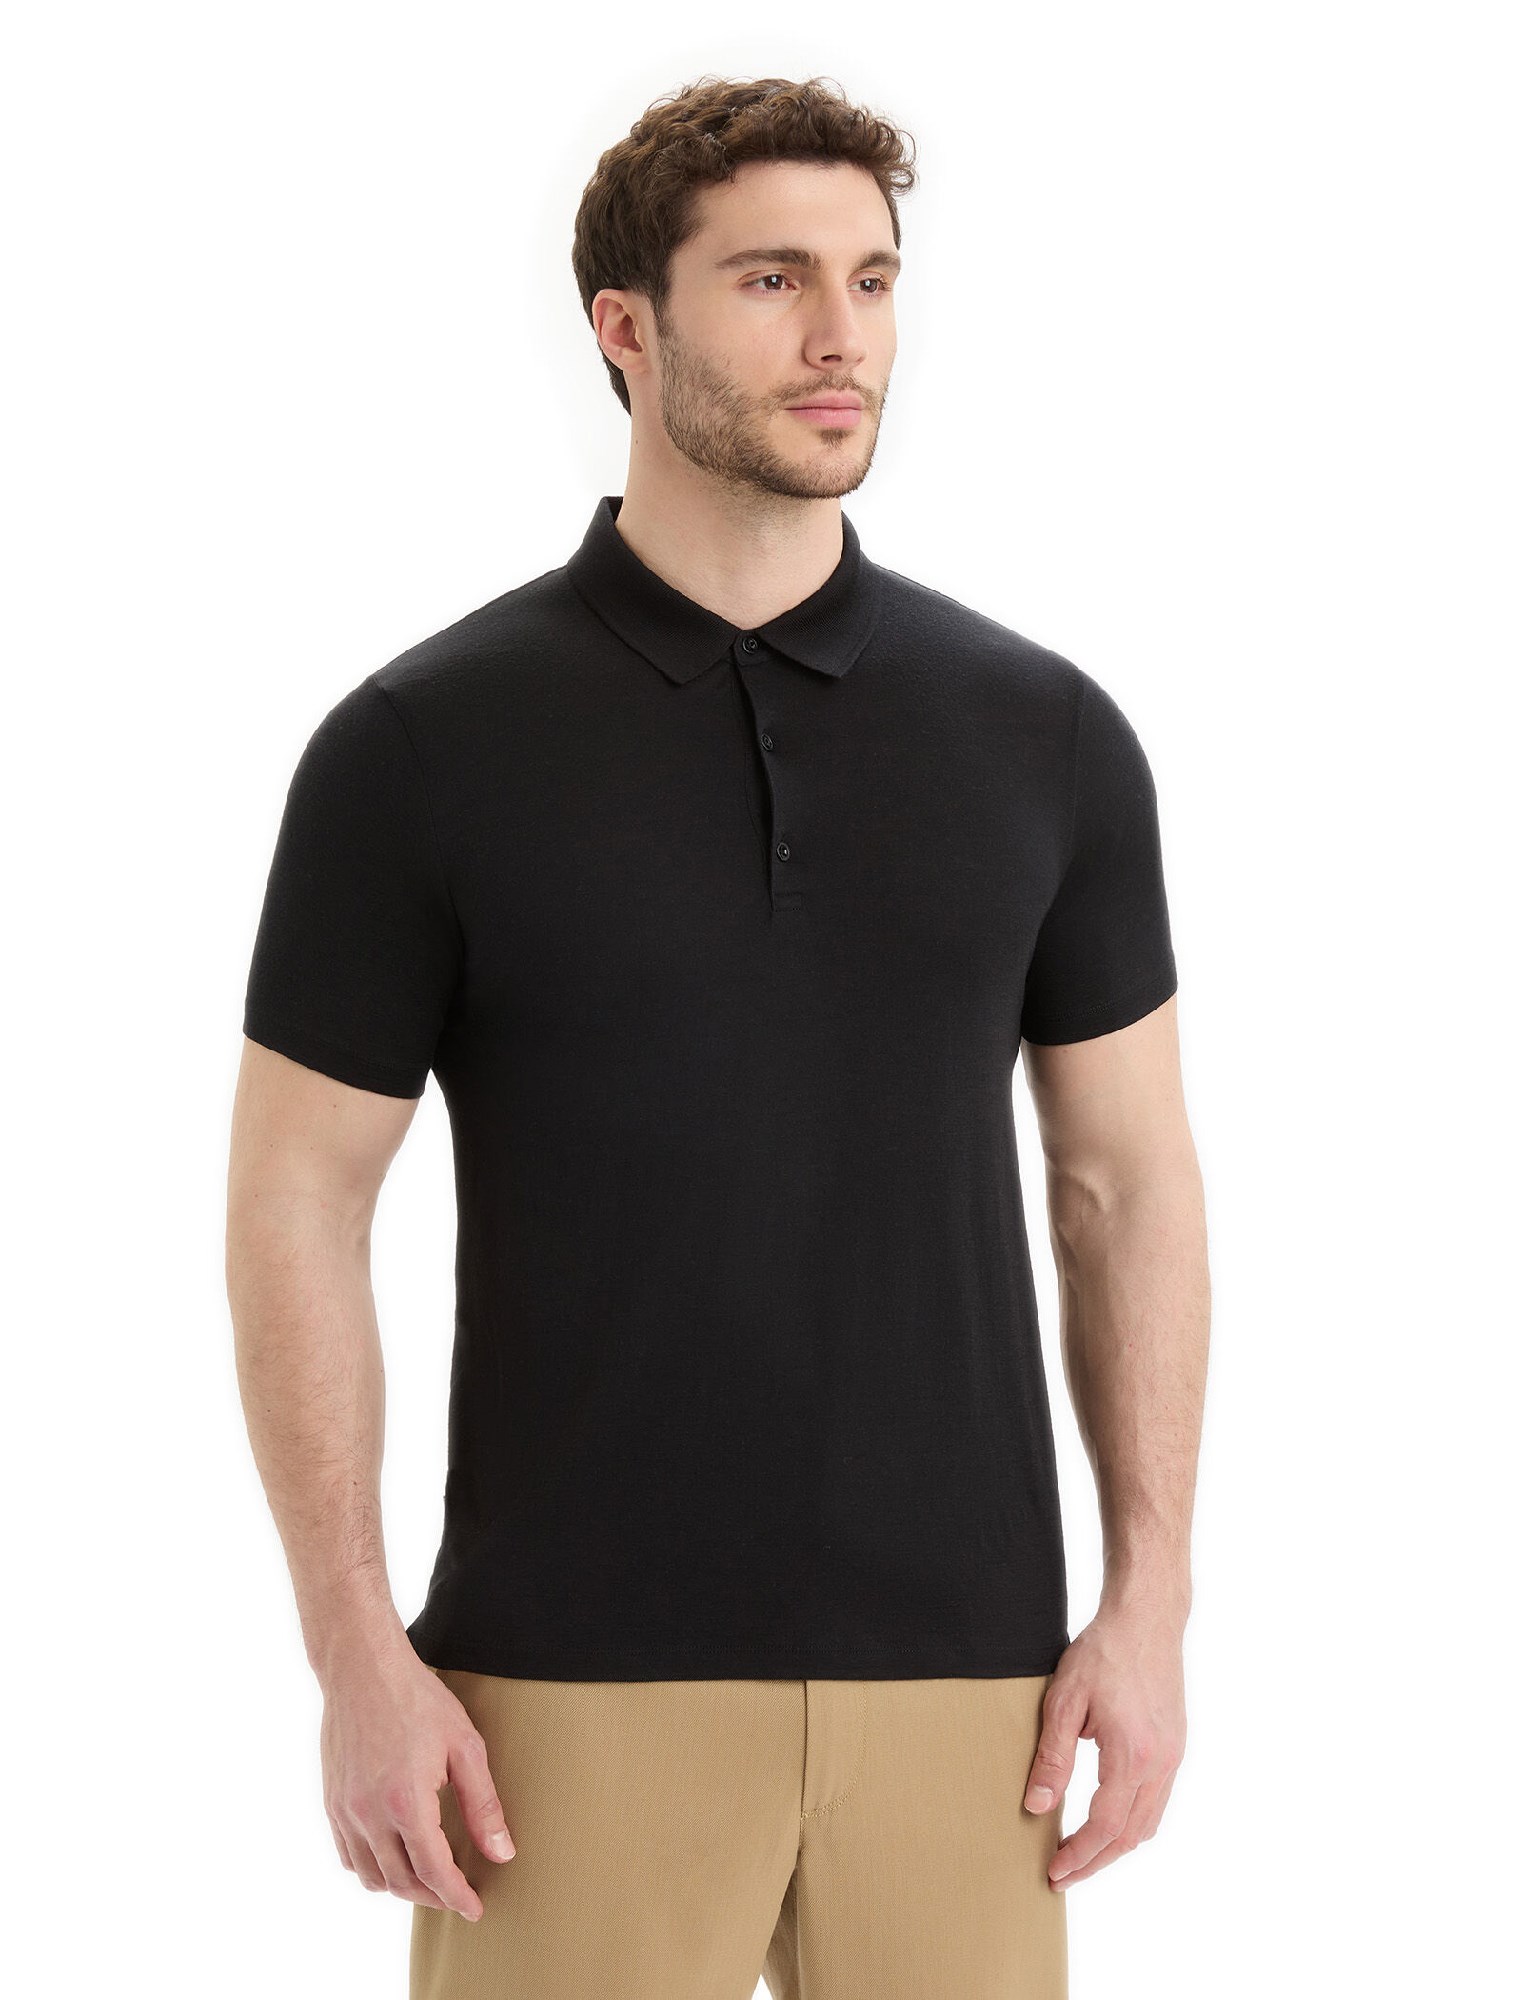 Icebreaker 260 Vertex Long Sleeve Natural Shades Thermal Top - Men's , Up  to 27% Off with Free S&H — CampSaver